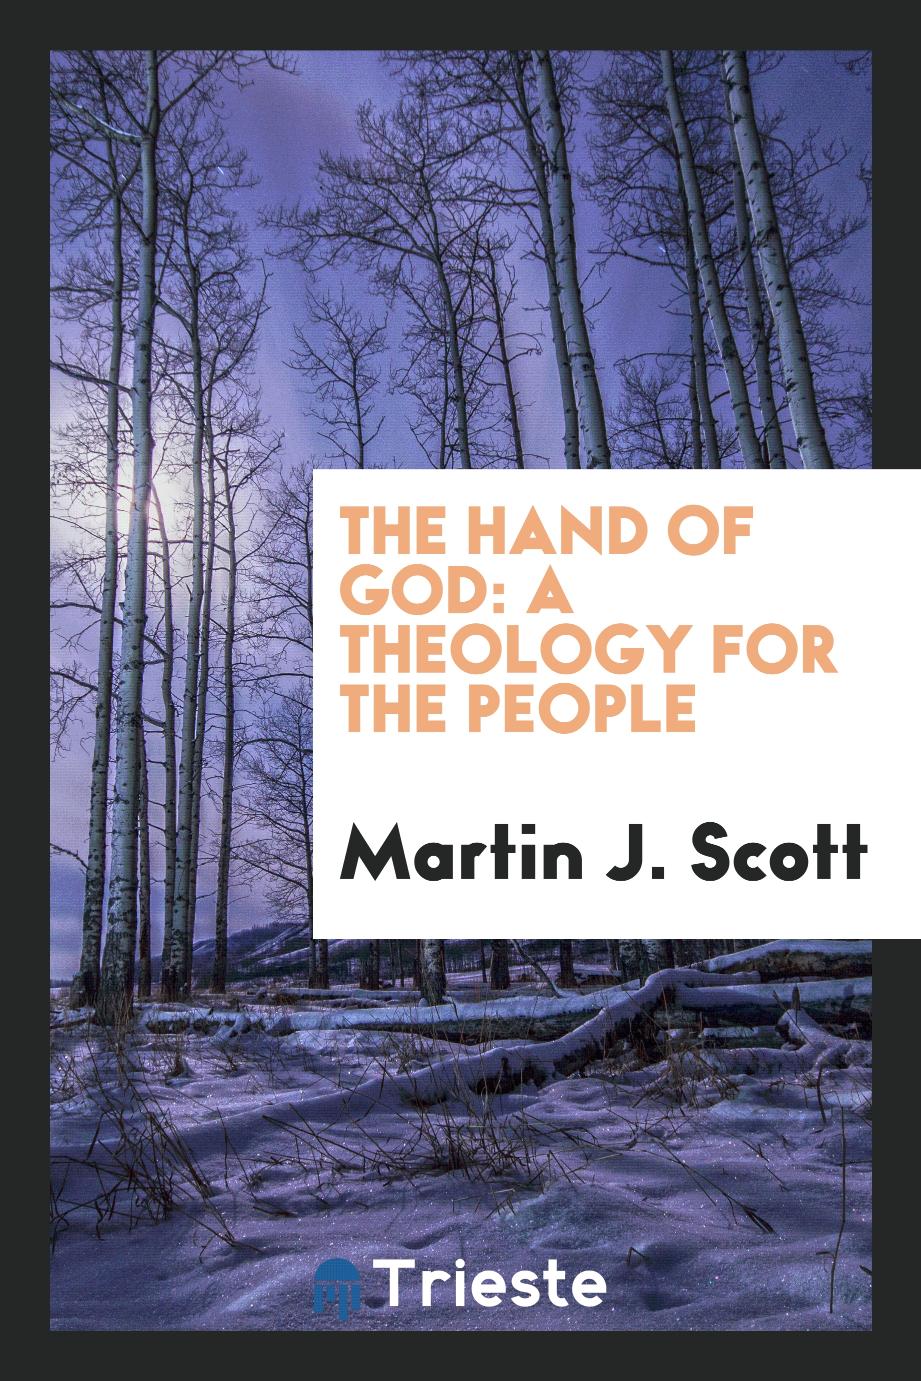 The hand of God: a theology for the people